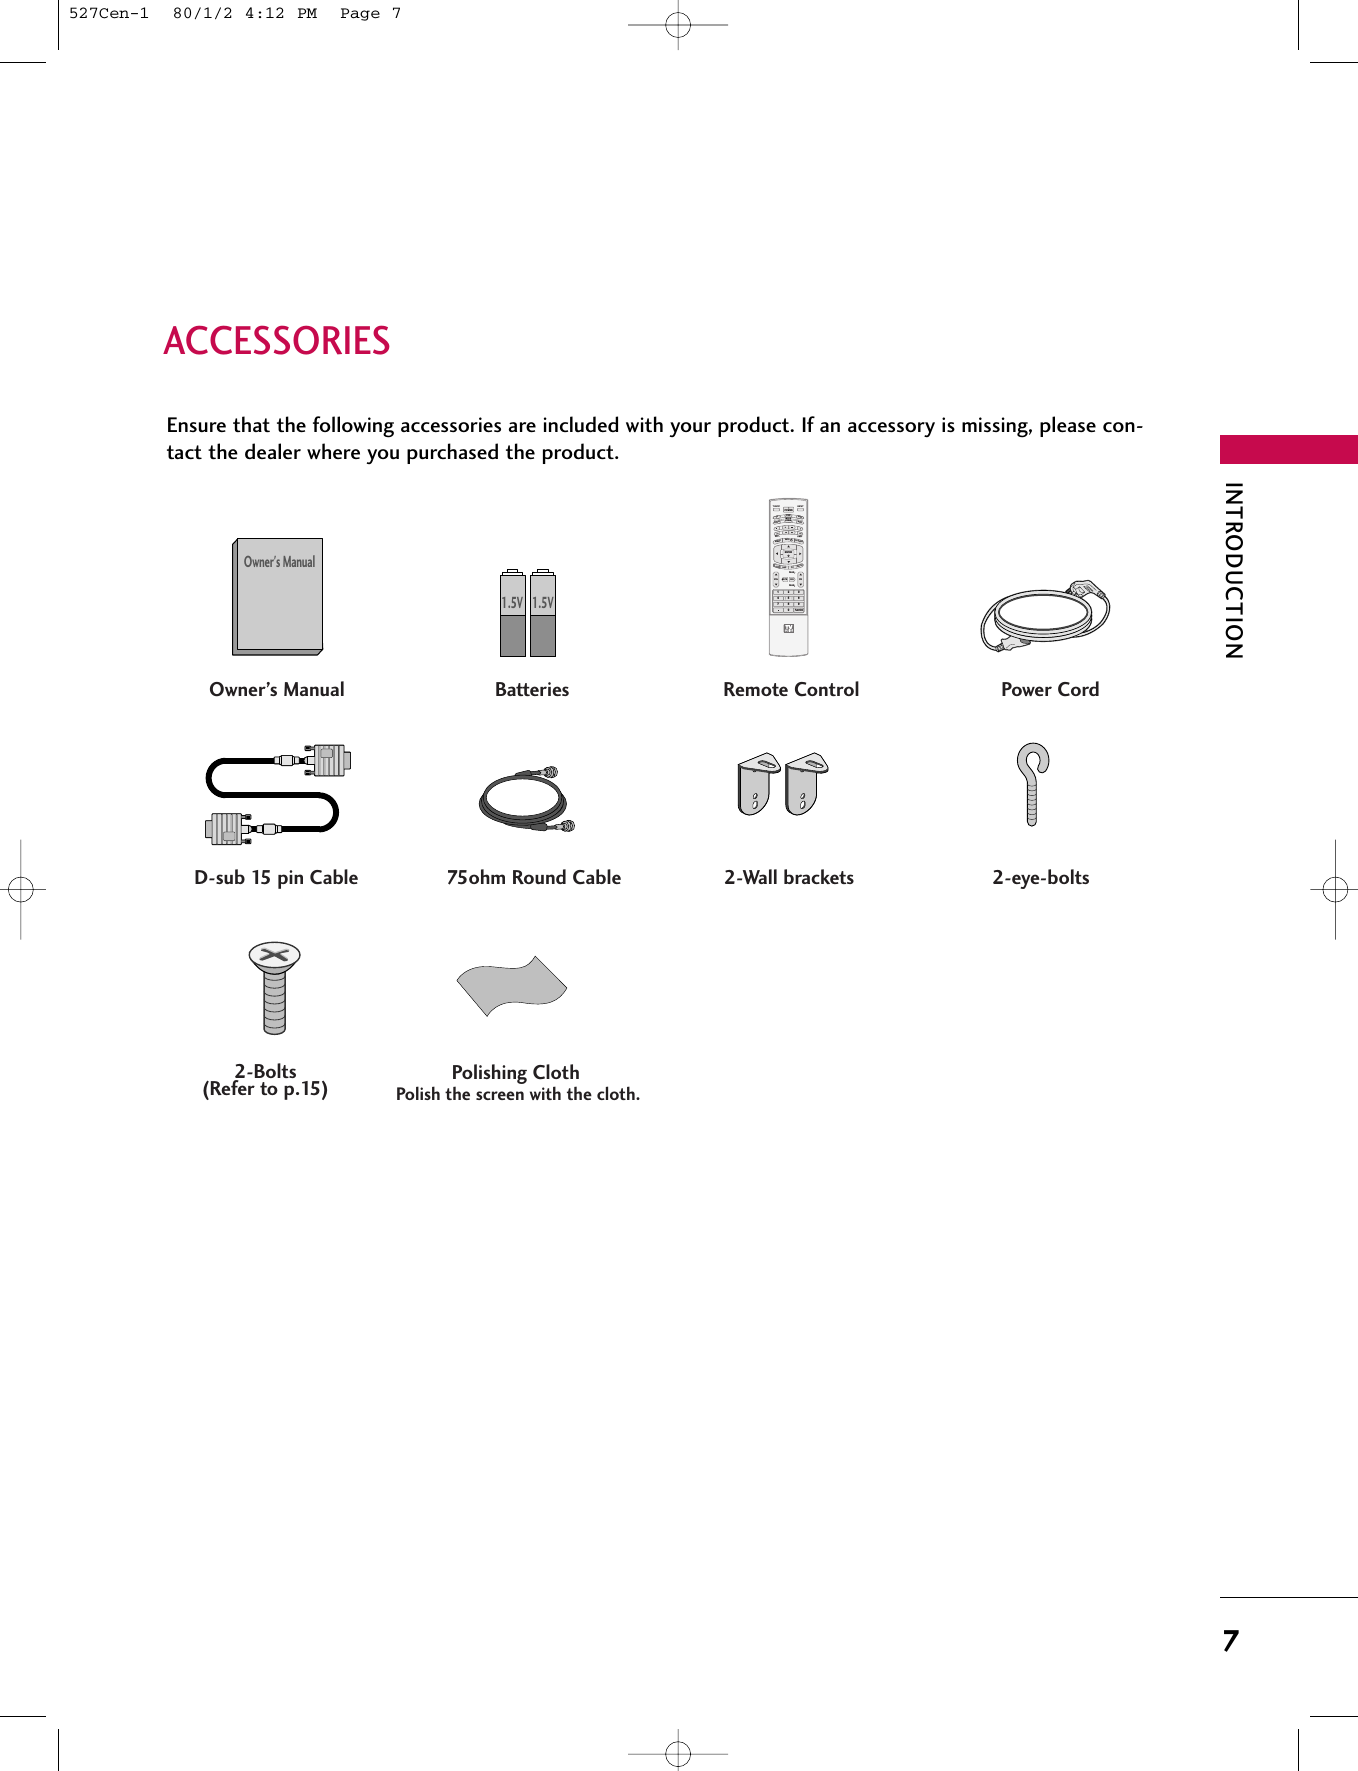 INTRODUCTION7ACCESSORIESEnsure that the following accessories are included with your product. If an accessory is missing, please con-tact the dealer where you purchased the product.Owner&apos;s Manual1.5V 1.5VOwner’s Manual BatteriesAPM   CCAUTO DEMOM/C EJECT1 2 3     4 5 6    7809   FLASHBKVOL CHMUTEFAVPAGEPAGEMENUINFO   iTV GUIDEENTEREXITSAPCCRATIOPOWERDAY -DAY+VCRTVDVDAUDIOCABLESTBMODETV INPUTINPUTRemote Control Power CordD-sub 15 pin Cable 75ohm Round CablePolishing ClothPolish the screen with the cloth.2-Bolts(Refer to p.15)2-eye-bolts2-Wall brackets527Cen-1  80/1/2 4:12 PM  Page 7